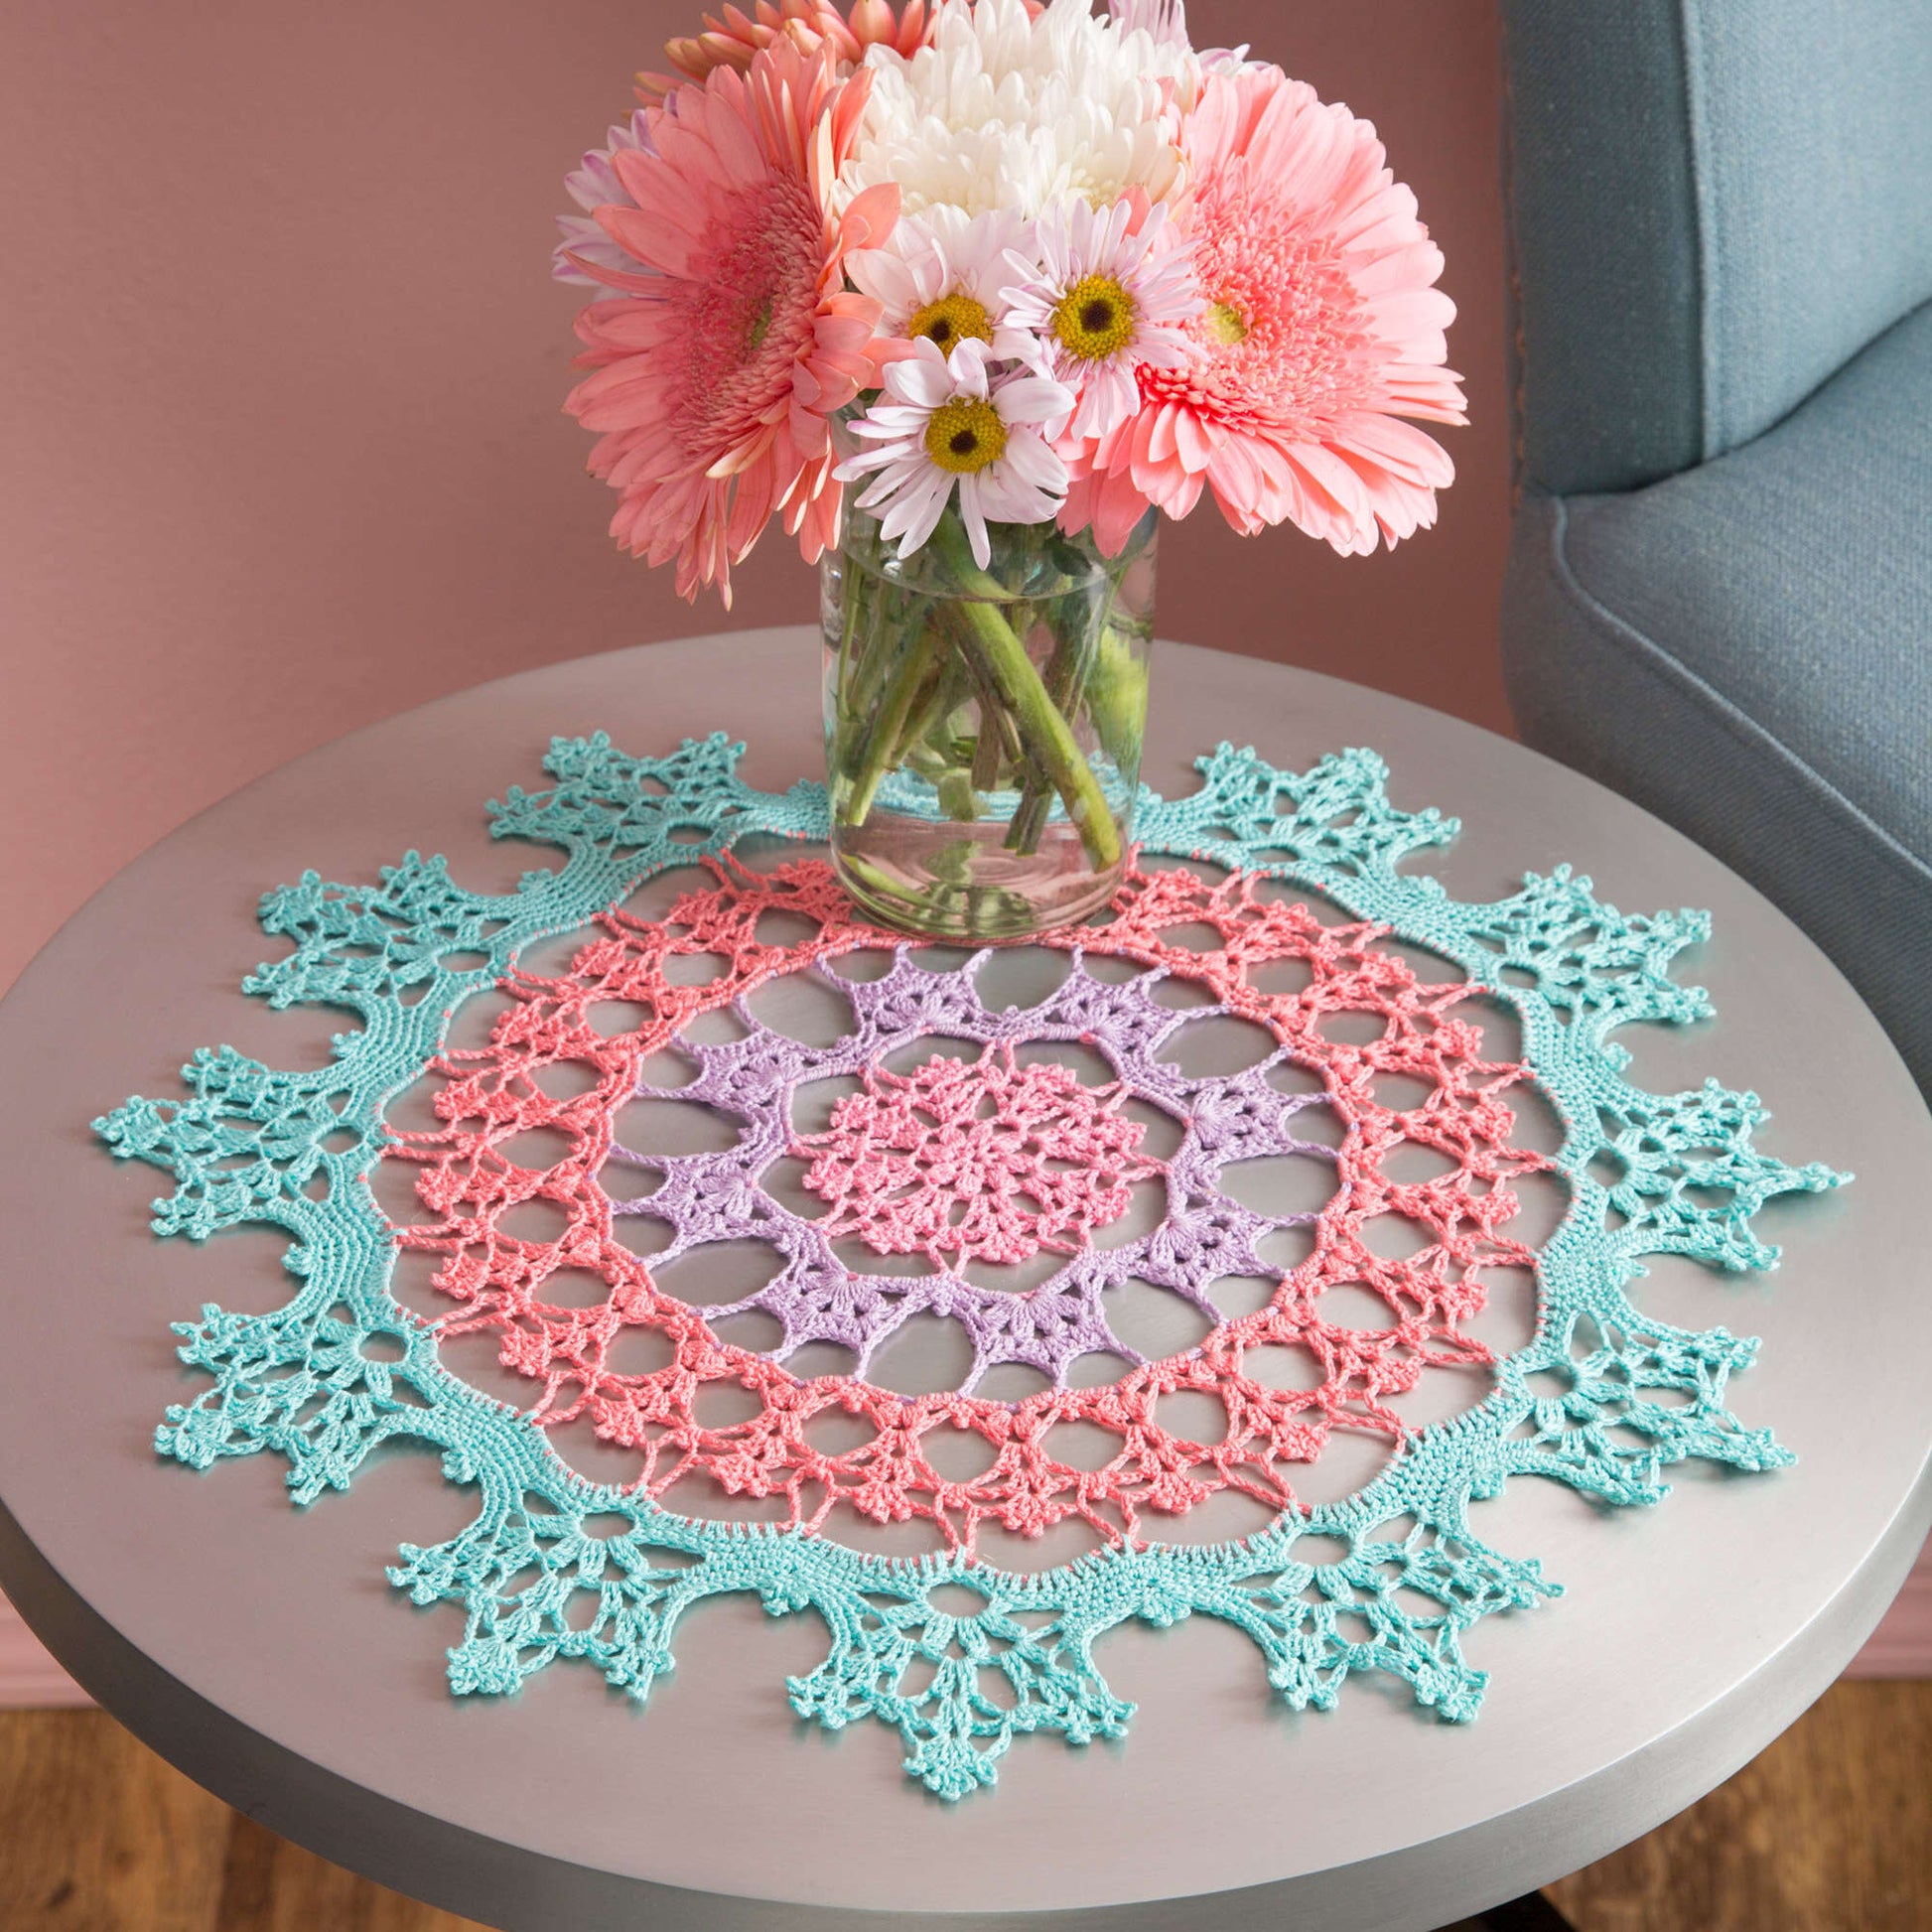 Aunt Lydia's Wisteria Doily Crochet Kitchen Décor made in Aunt Lydia's Classic Crochet Thread yarn